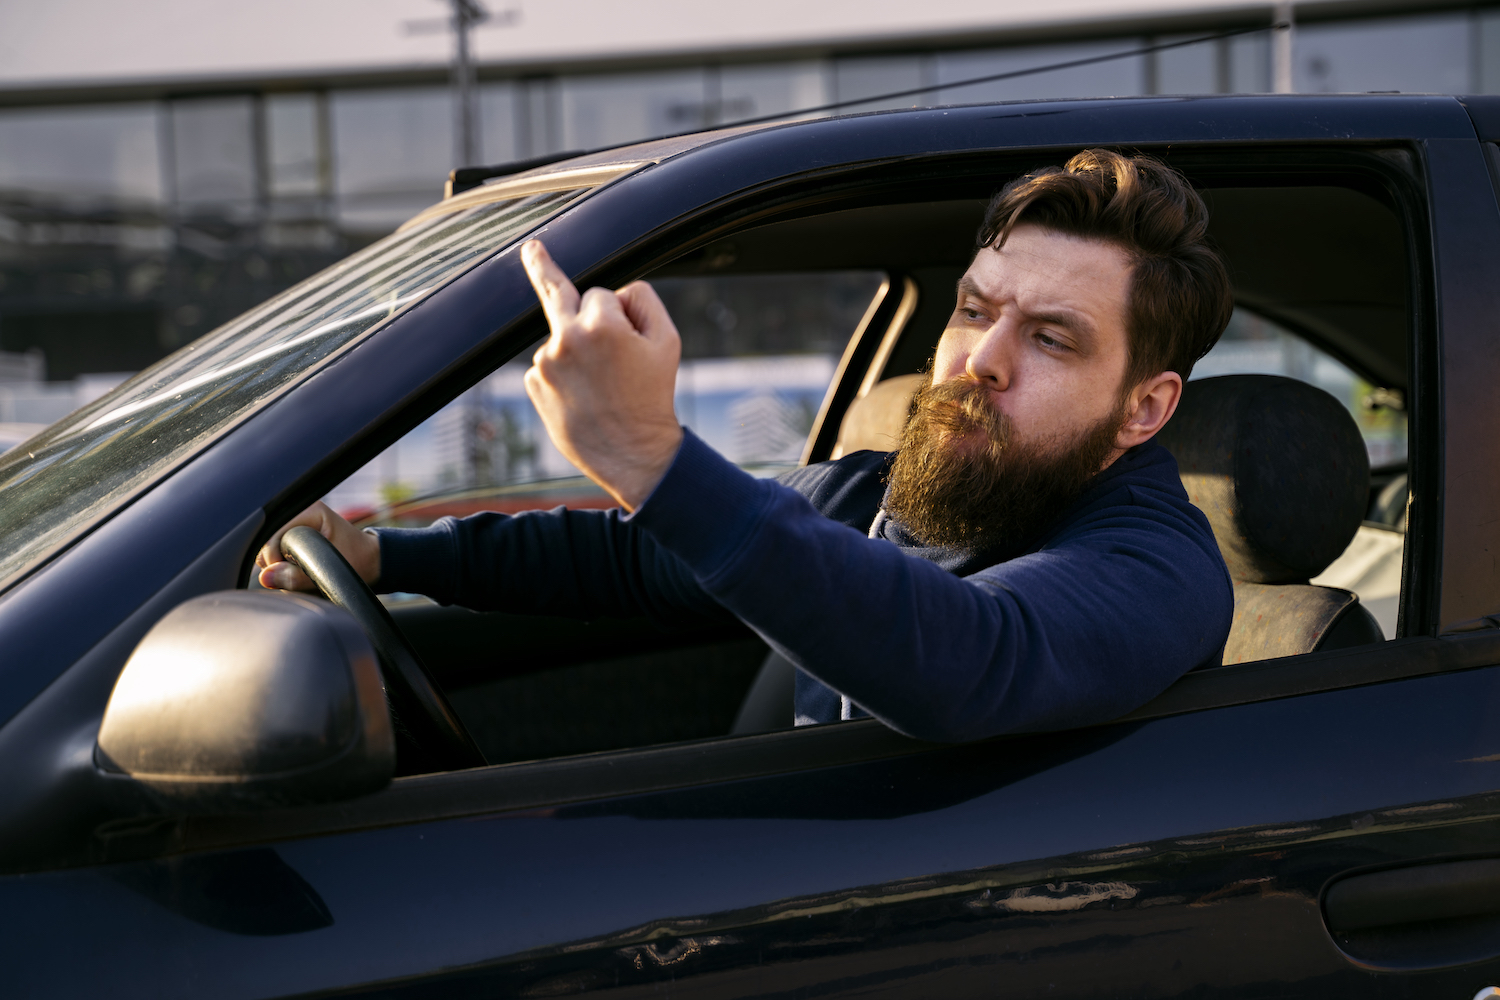 A man giving someone else the finger while driving